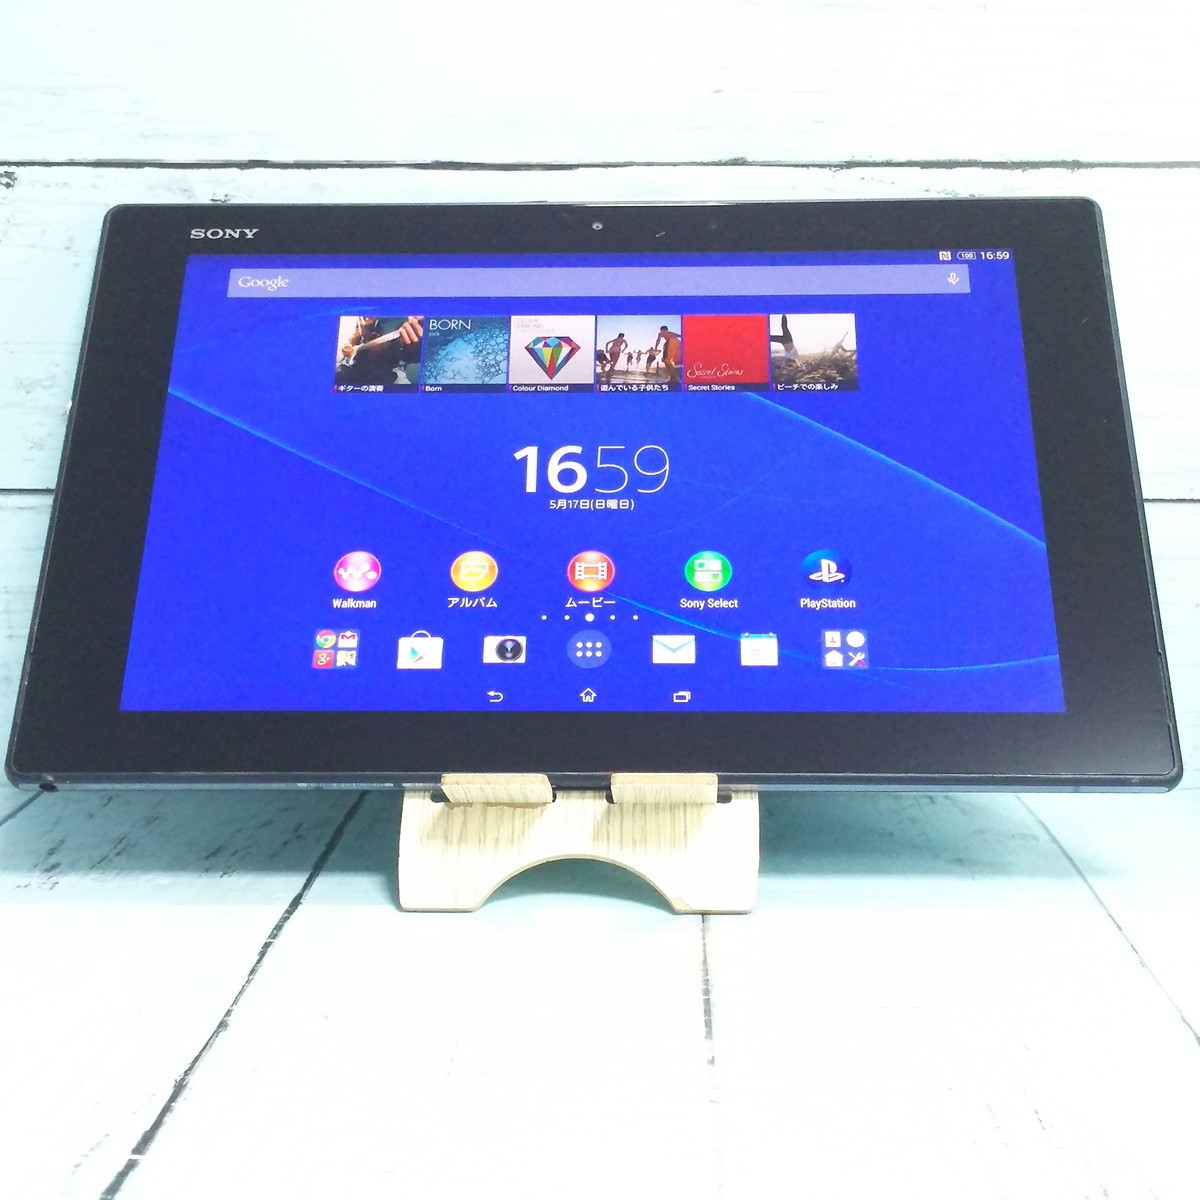 SONY Xperia Z2 Android Tablet Wi-Fi SGP512 本体 484090